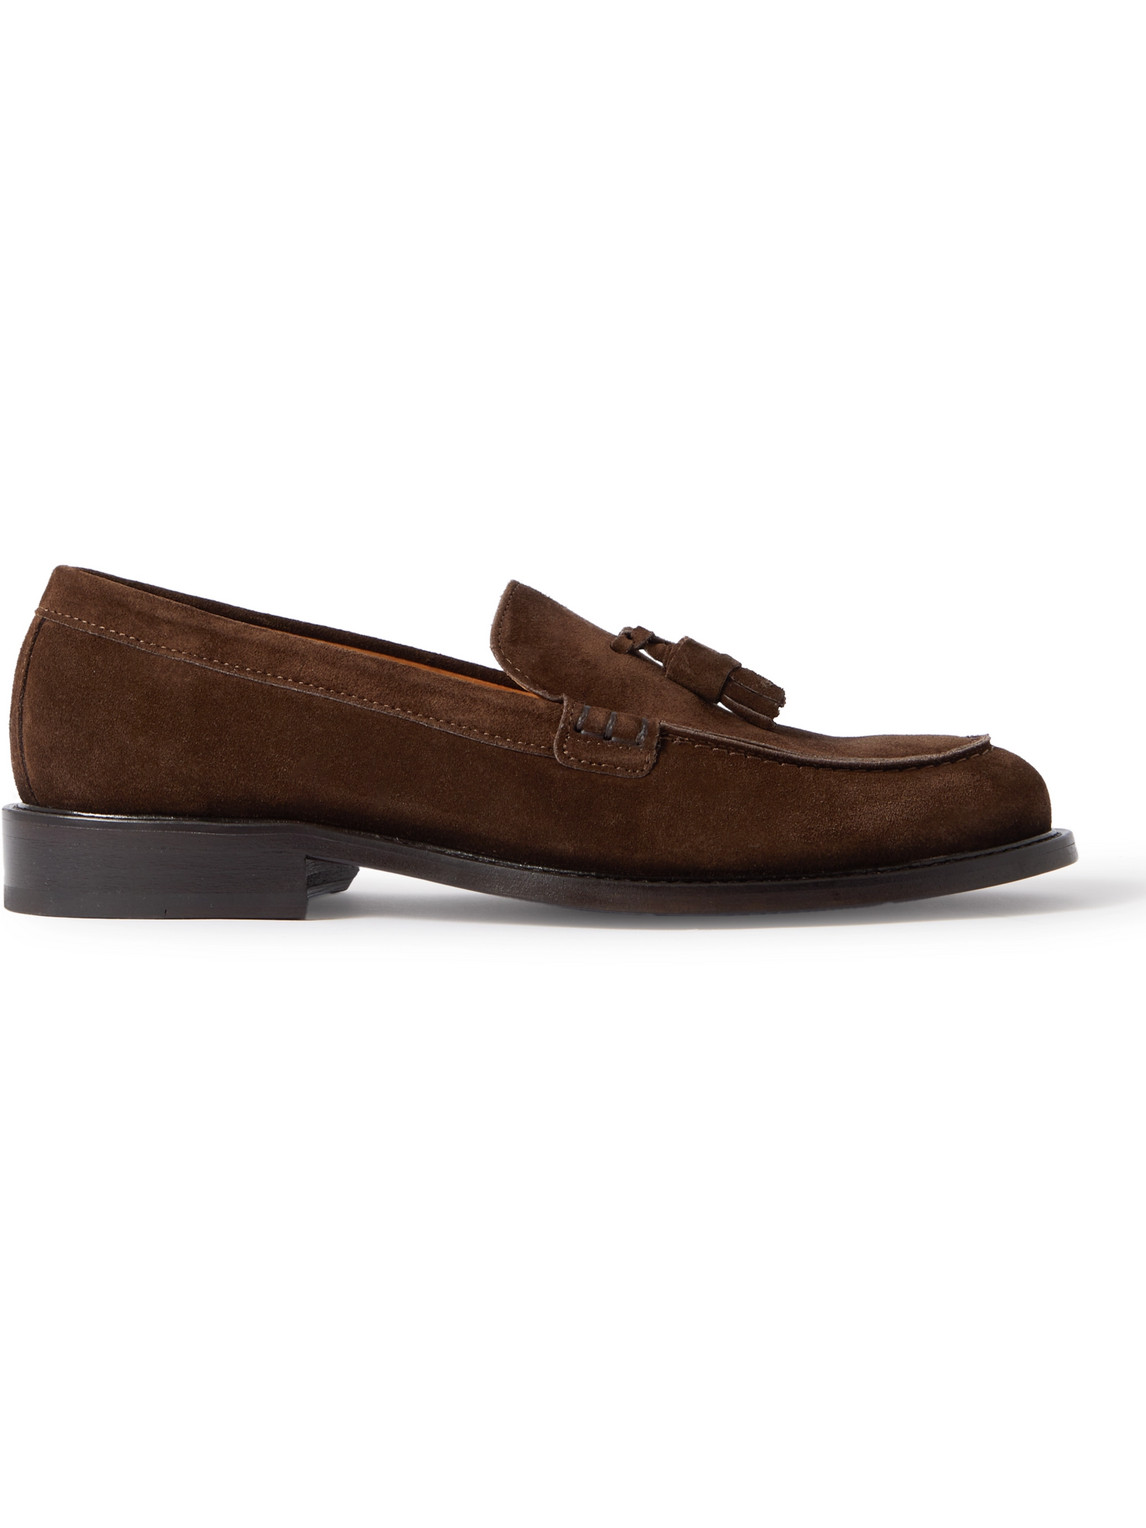 Mr P Tasseled Regenerated Suede By Evolo® Loafers In Brown